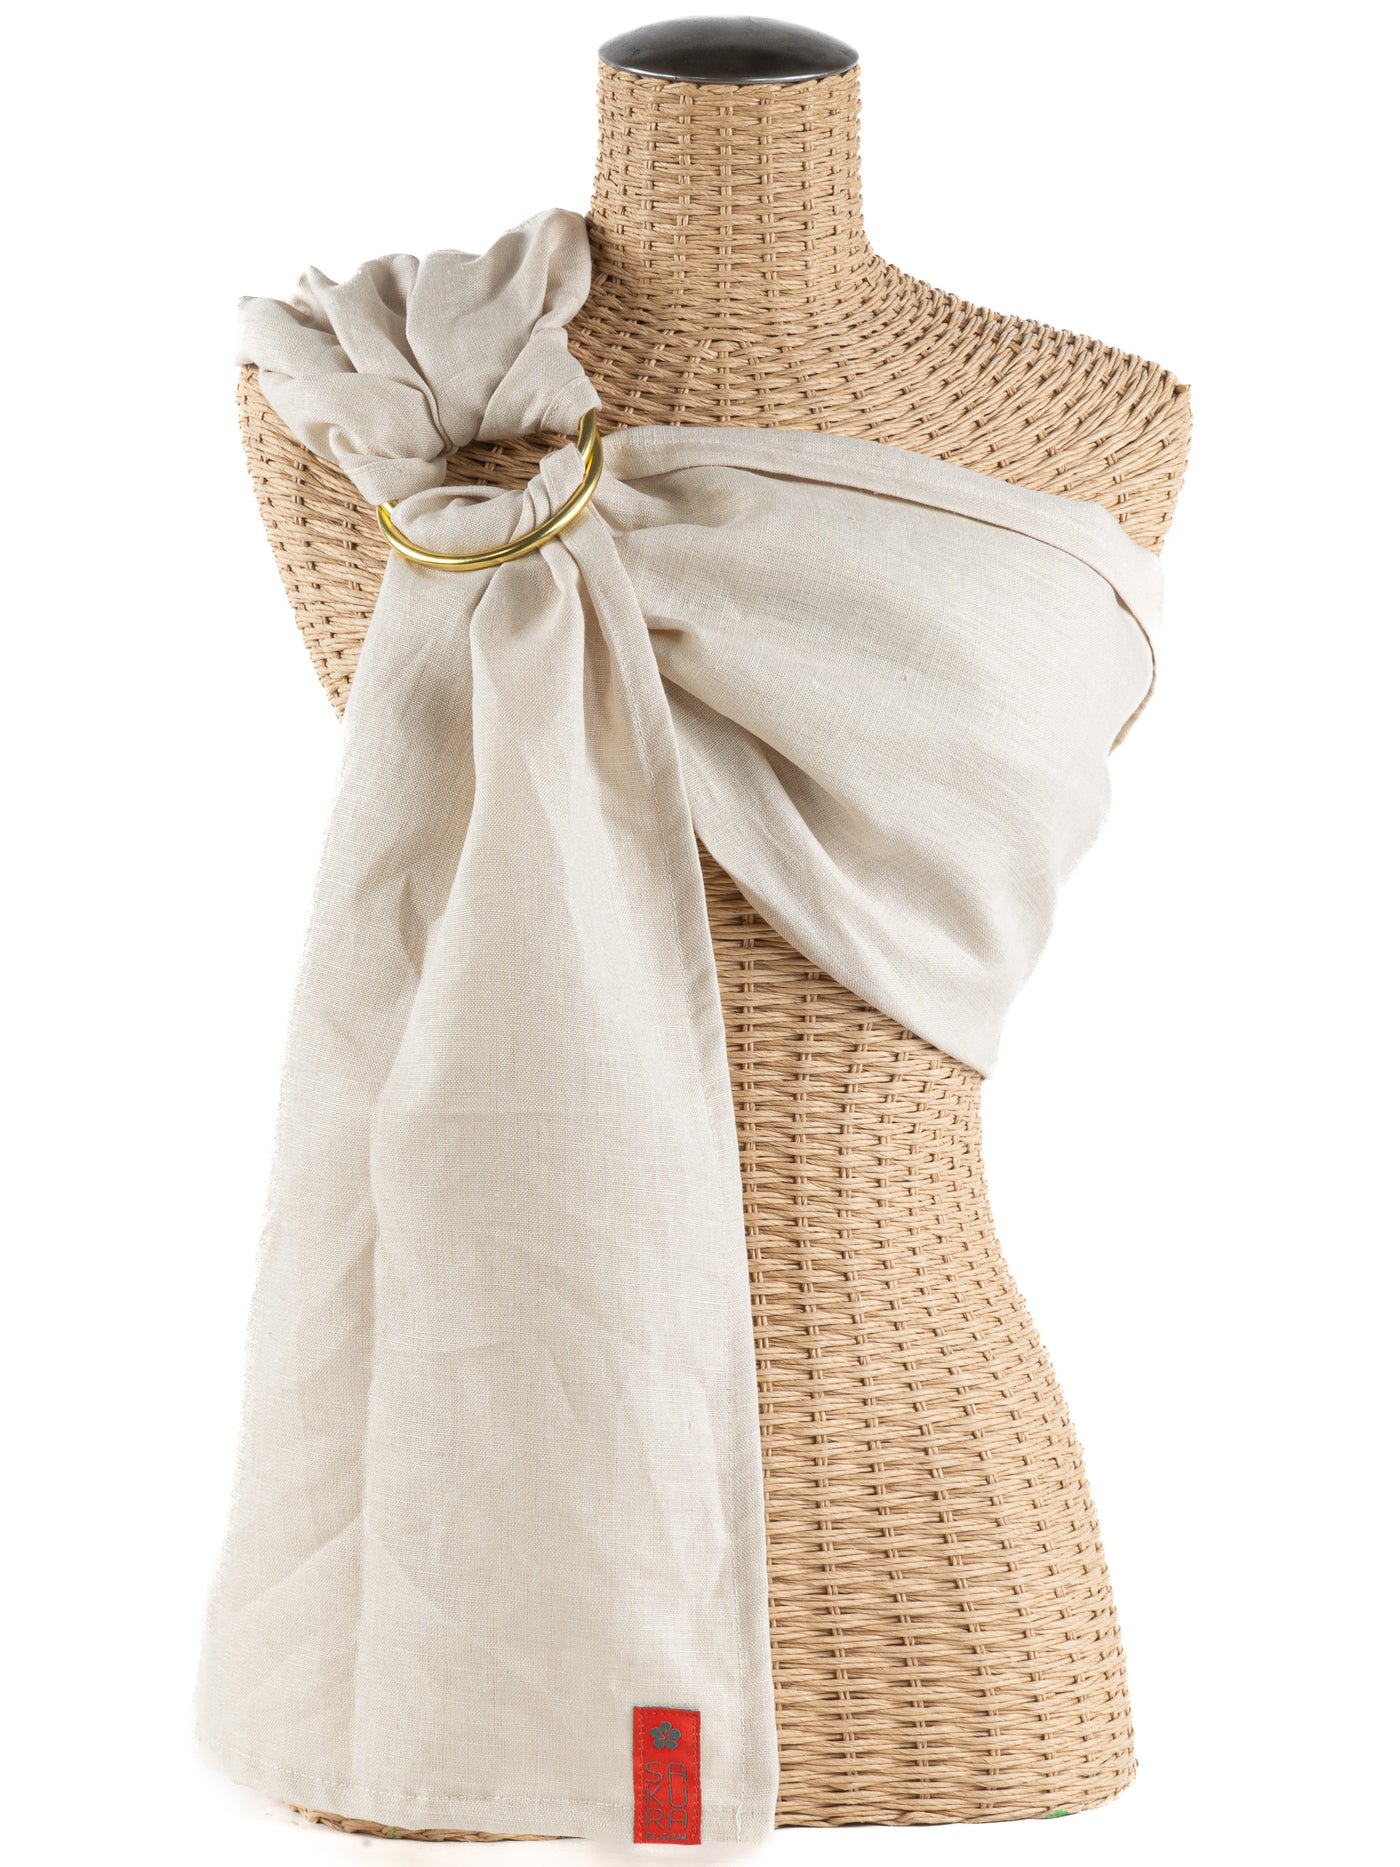 Make Baby Carrying Easier with Sakura Bloom's Classic Linen Ring Sling! -  Bellaboo